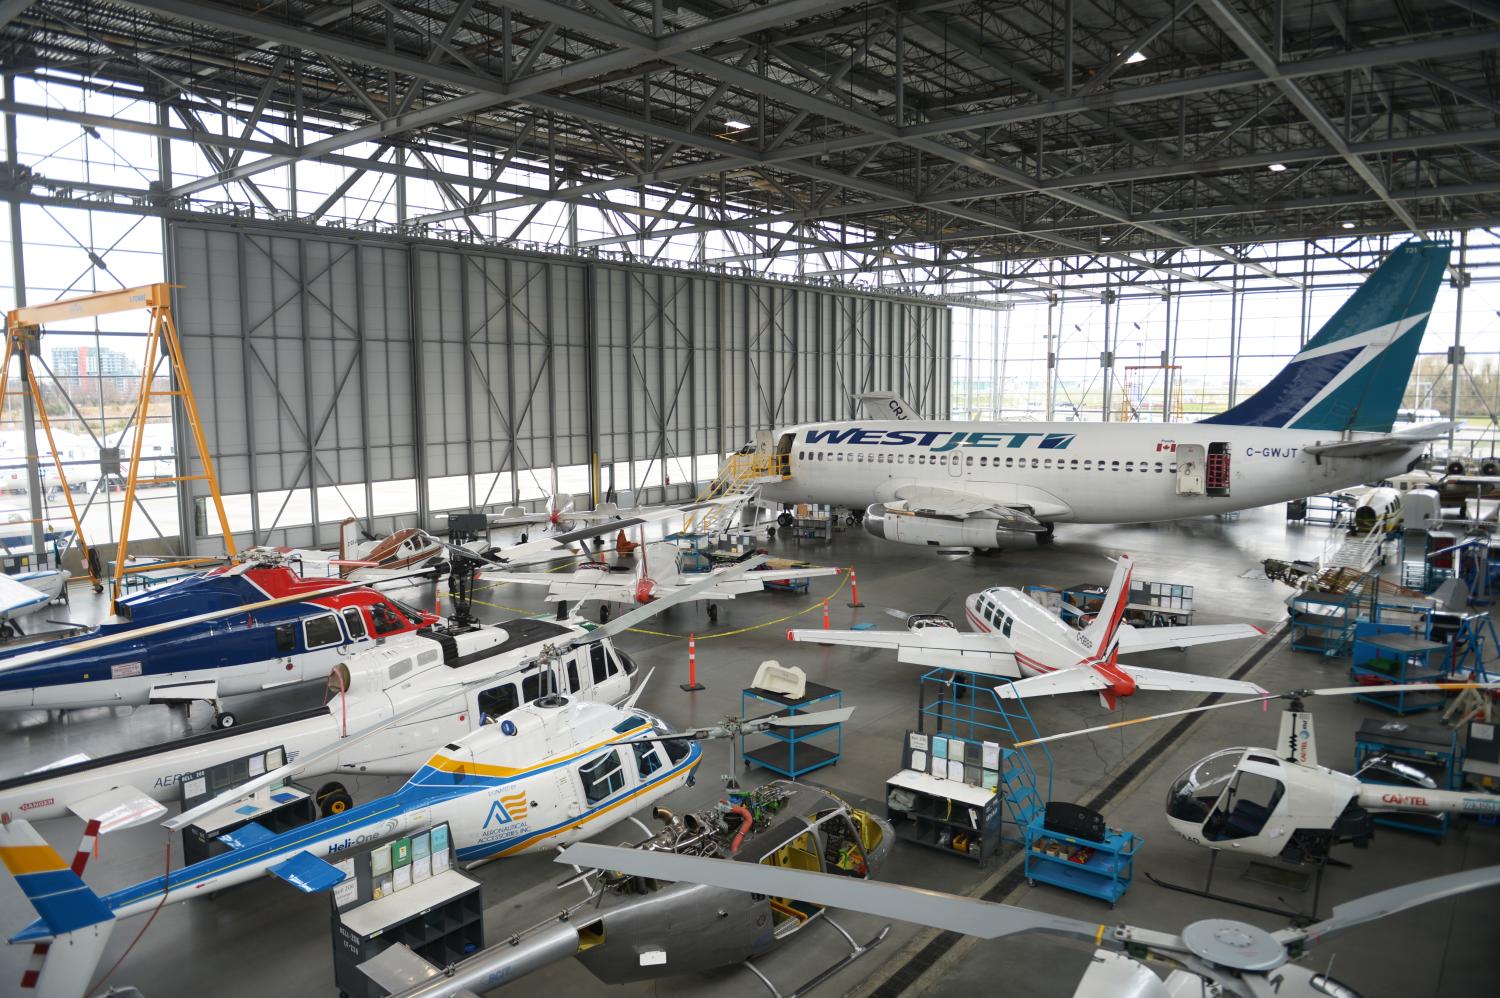 RICHMOND,CANADA-MARCH 21,2017: Aerospace Campus of British Columbia Institute of Technology's airplanes and helicopters offer students practical learning, March 21, 2017, Richmond, Canada.